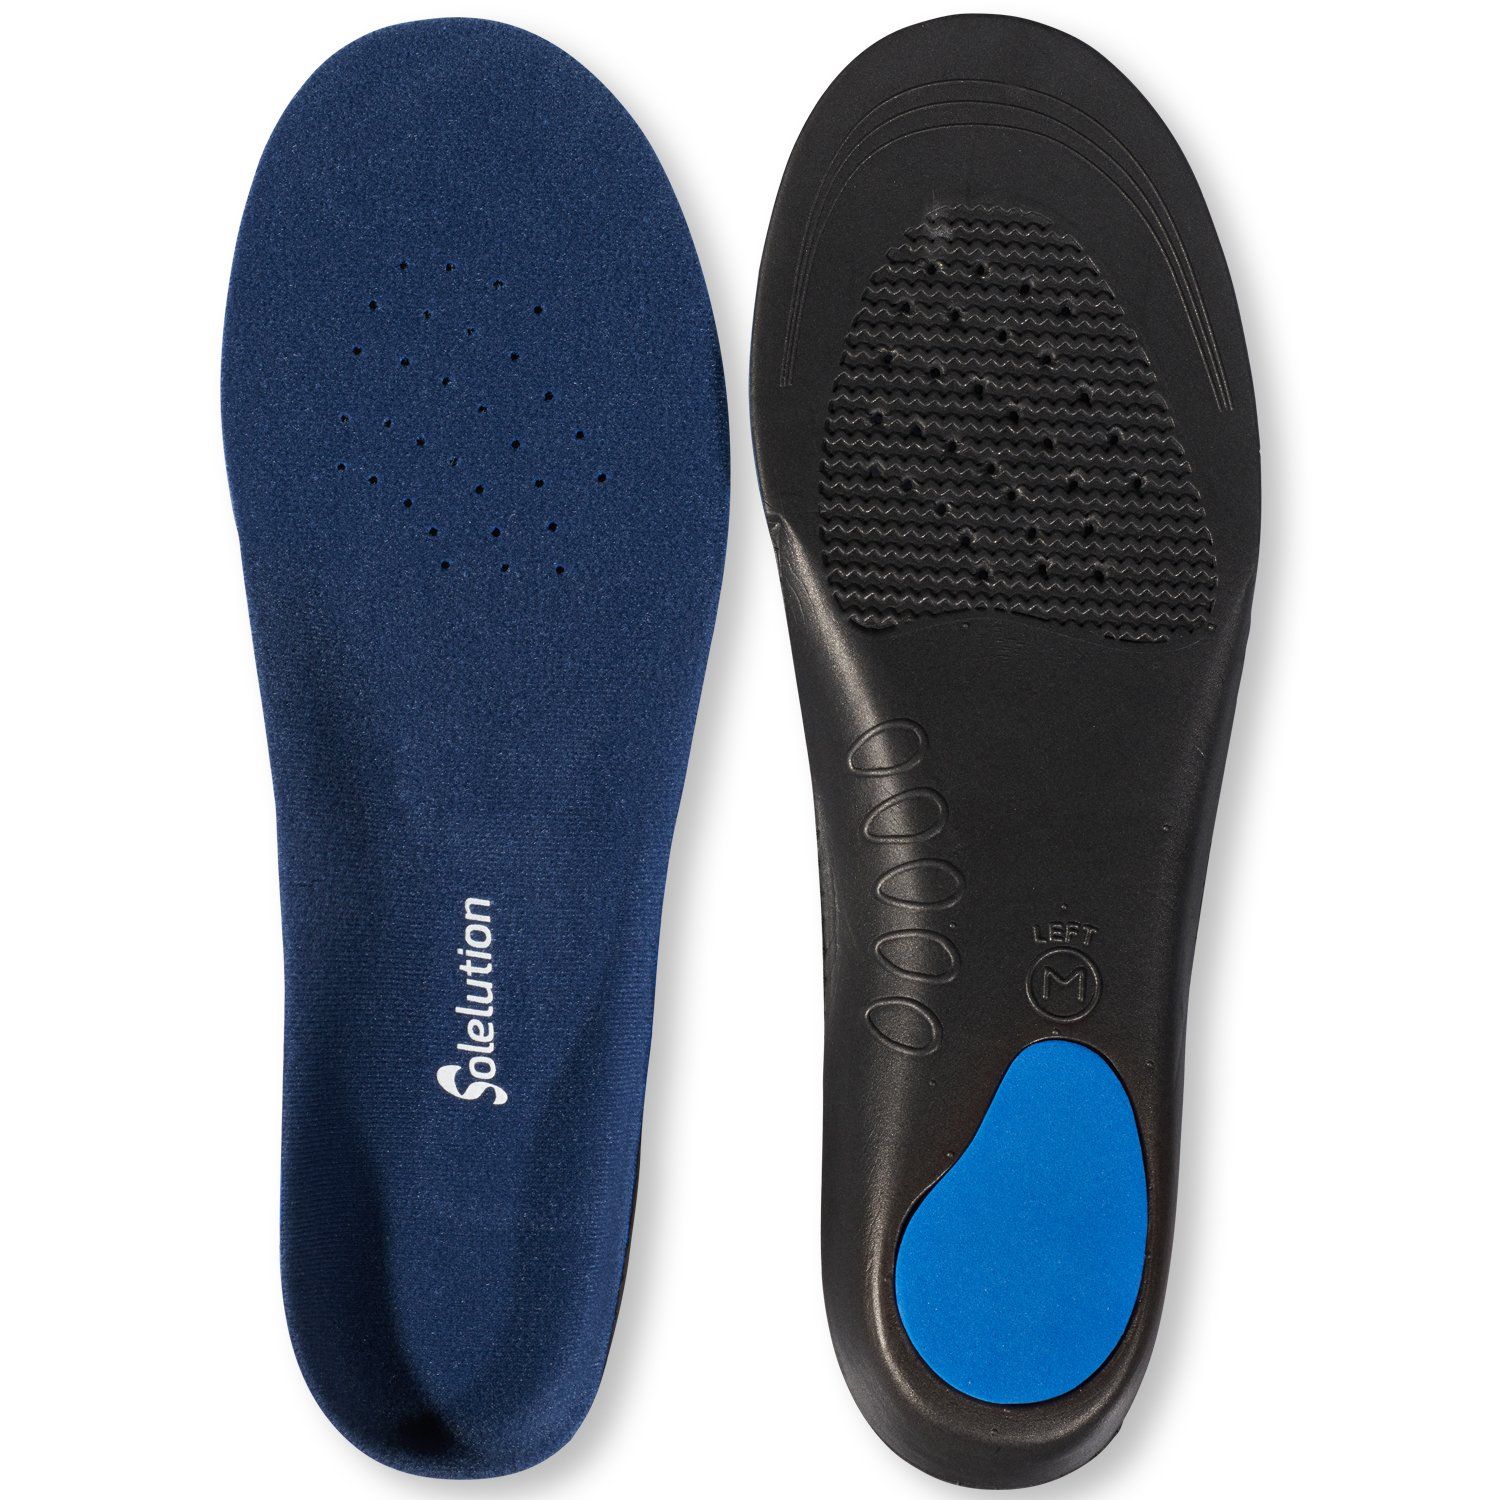 solelution flatfoot insoles bottom and top view